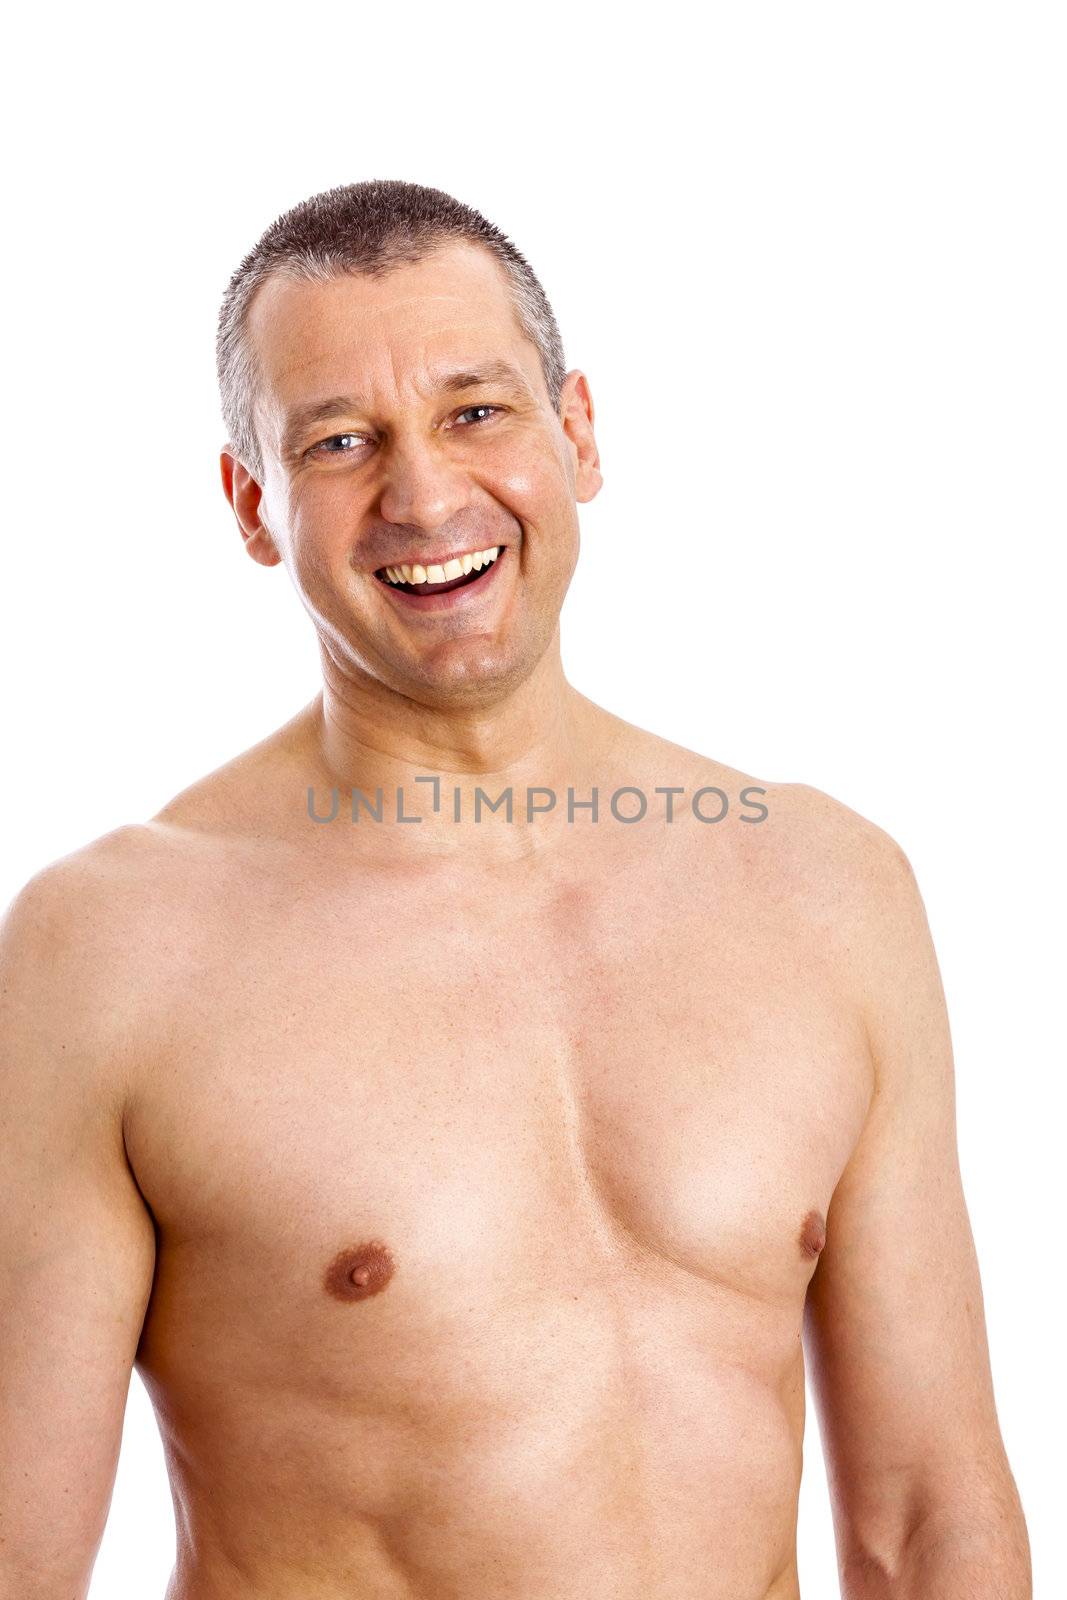 An image of a body of a middle age man